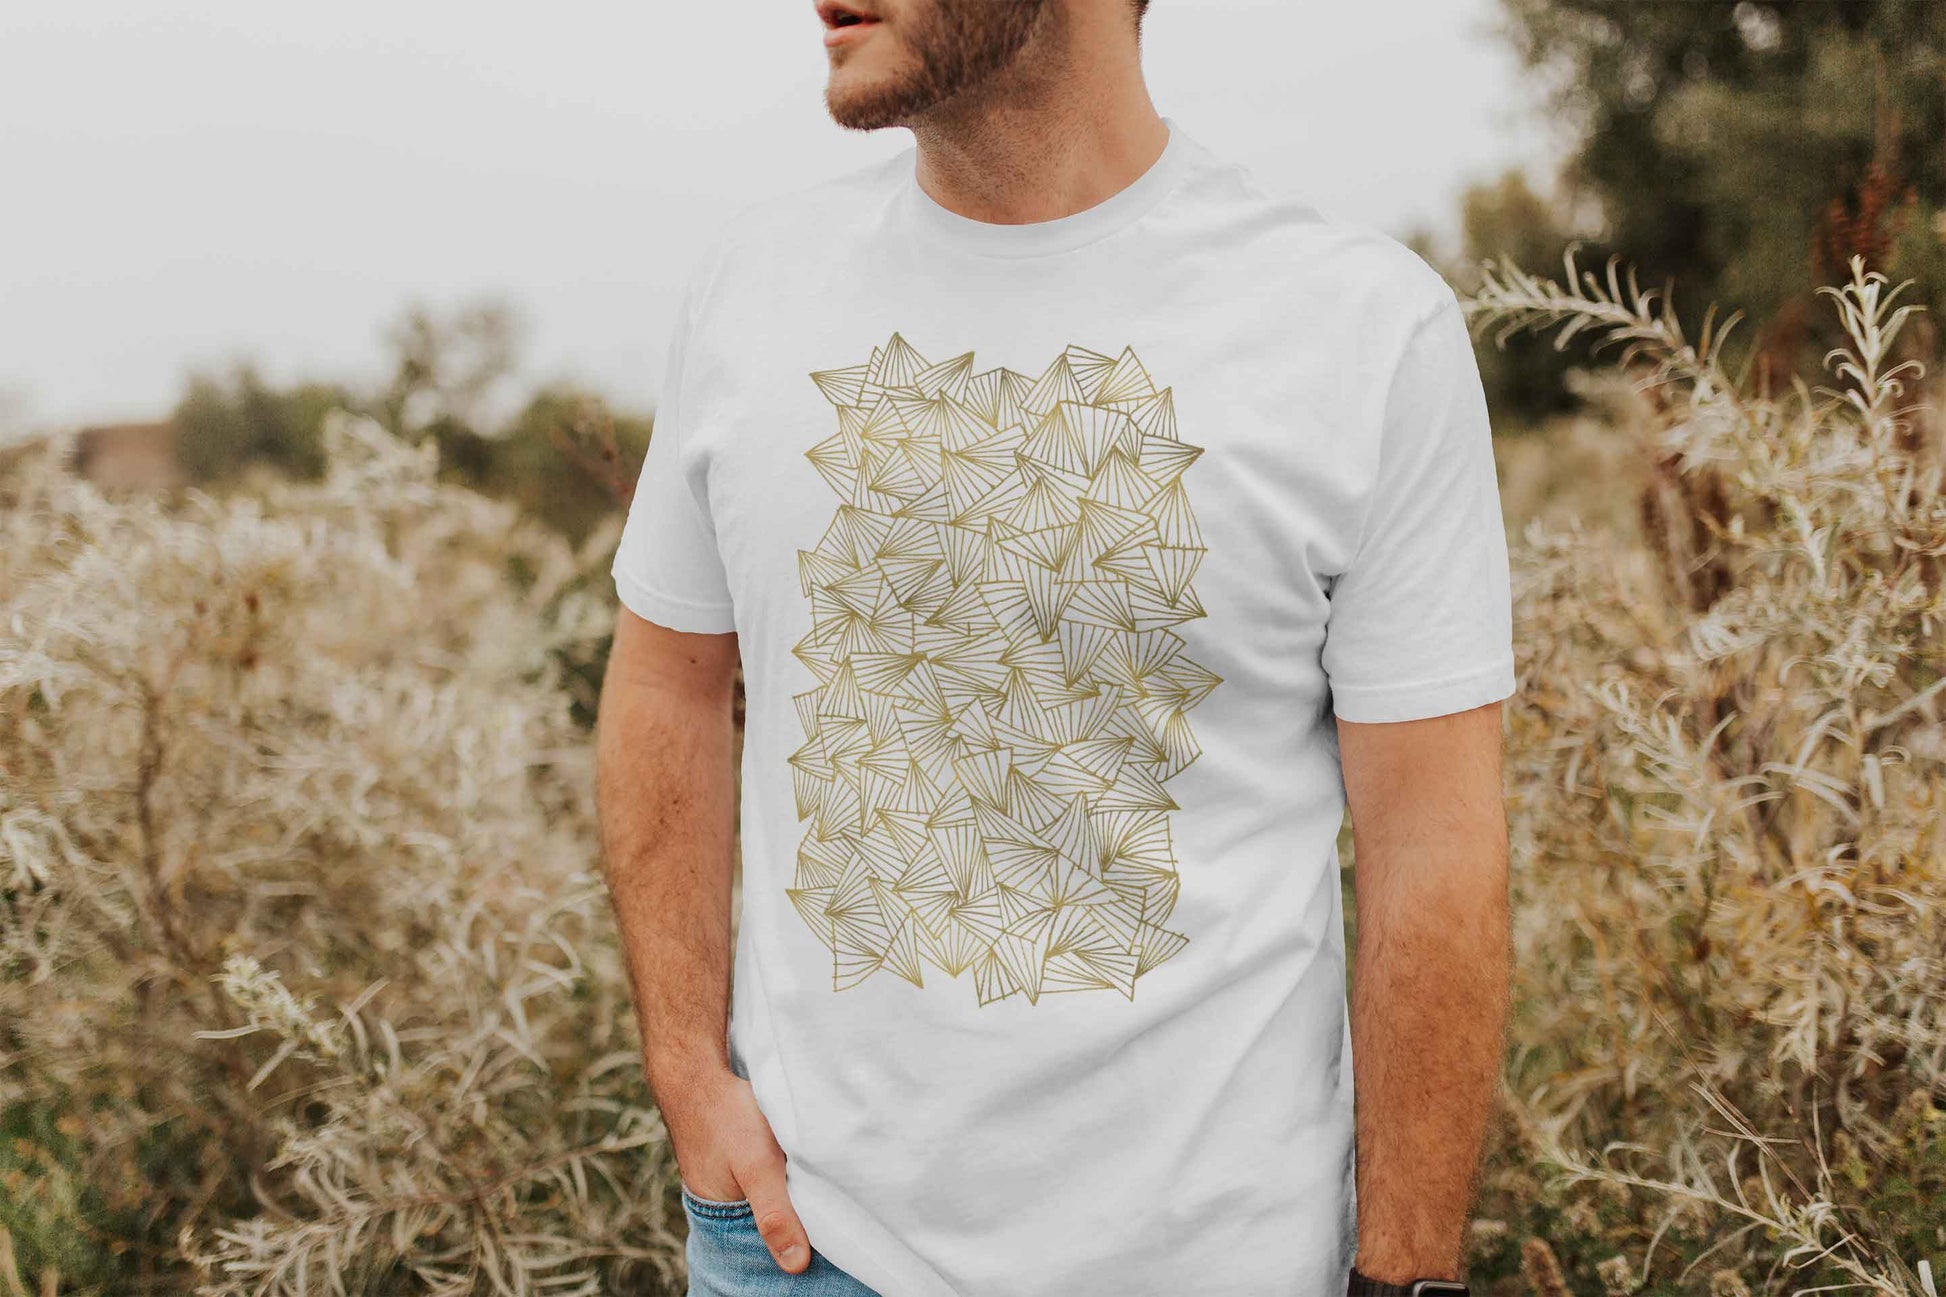 Model posing in a field with gaggle of triangles gold design on white unisex t-shirt.